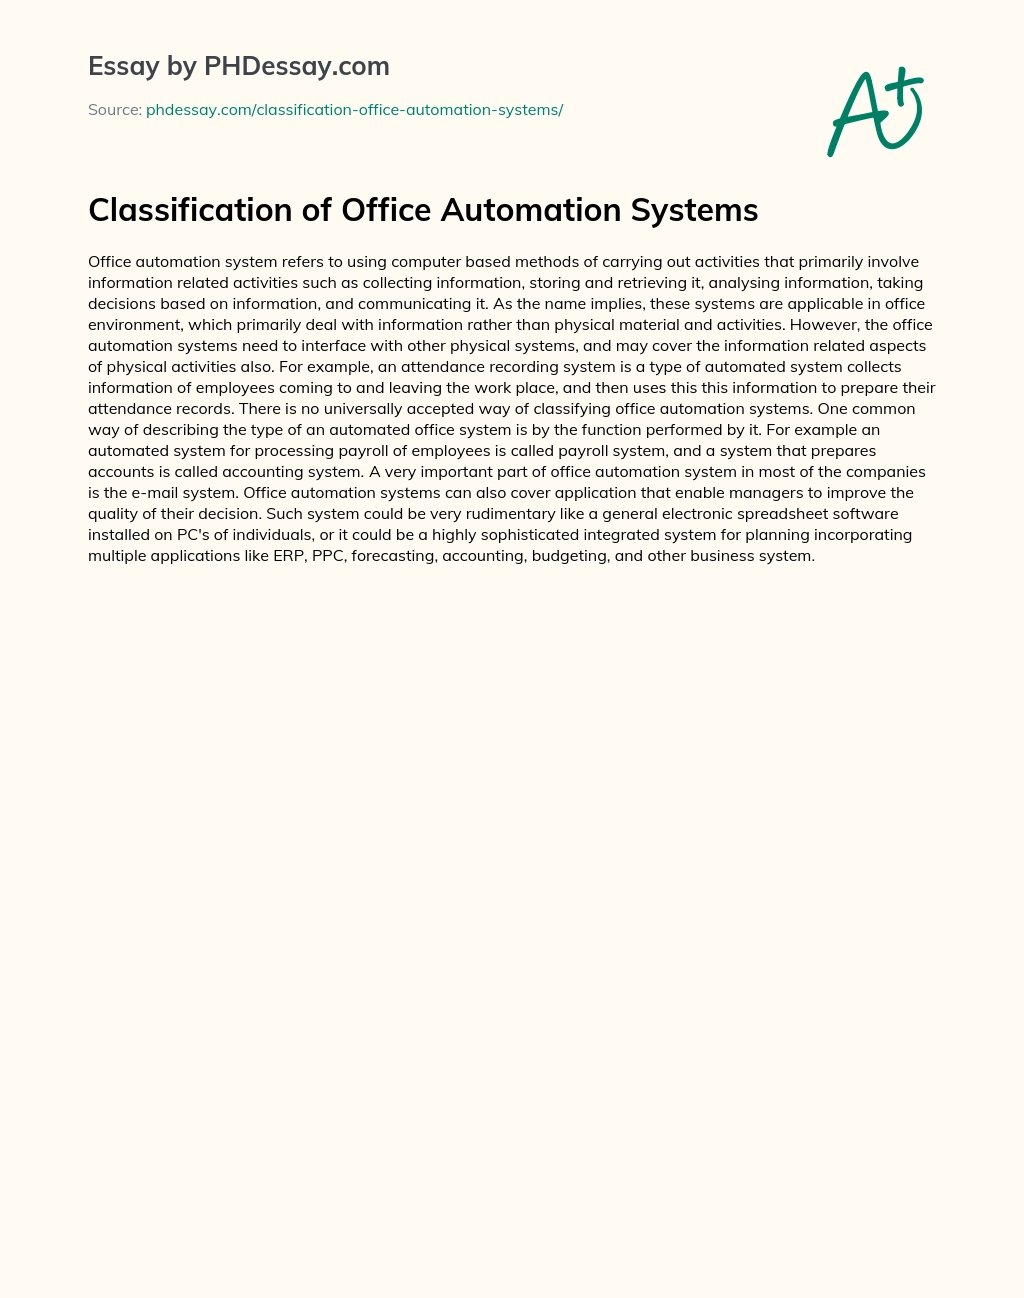 Classification of Office Automation Systems essay